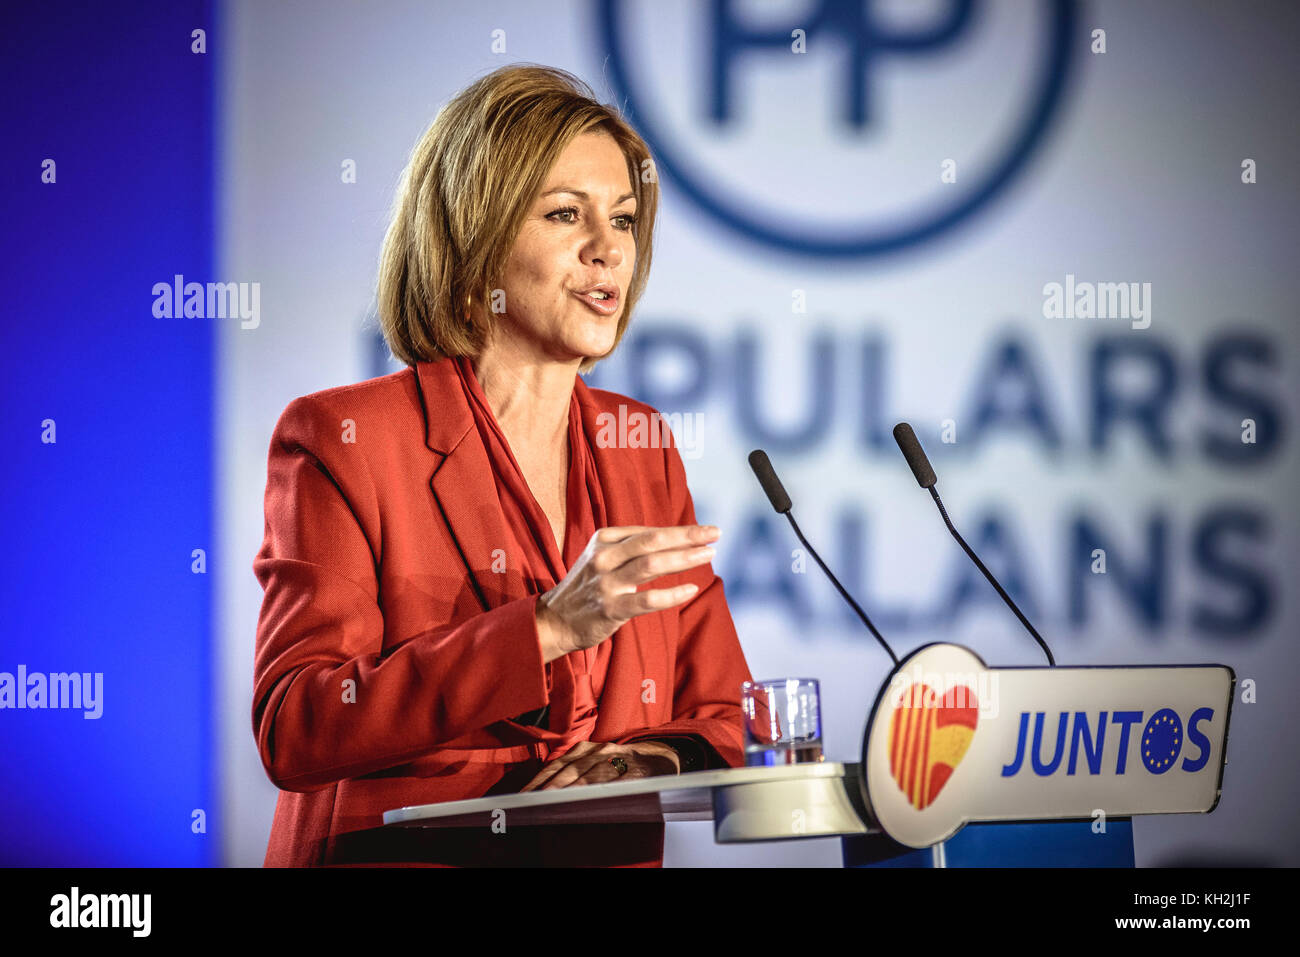 Barcelona, Spain. 12 November, 2017:  MARIA DOLORES COSPEDAL, General Secretary of the PP (People's Party), addresses the audience during the presentation of the party's candidates for the Catalan elections on December 21st Credit: Matthias Oesterle/Alamy Live News Stock Photo